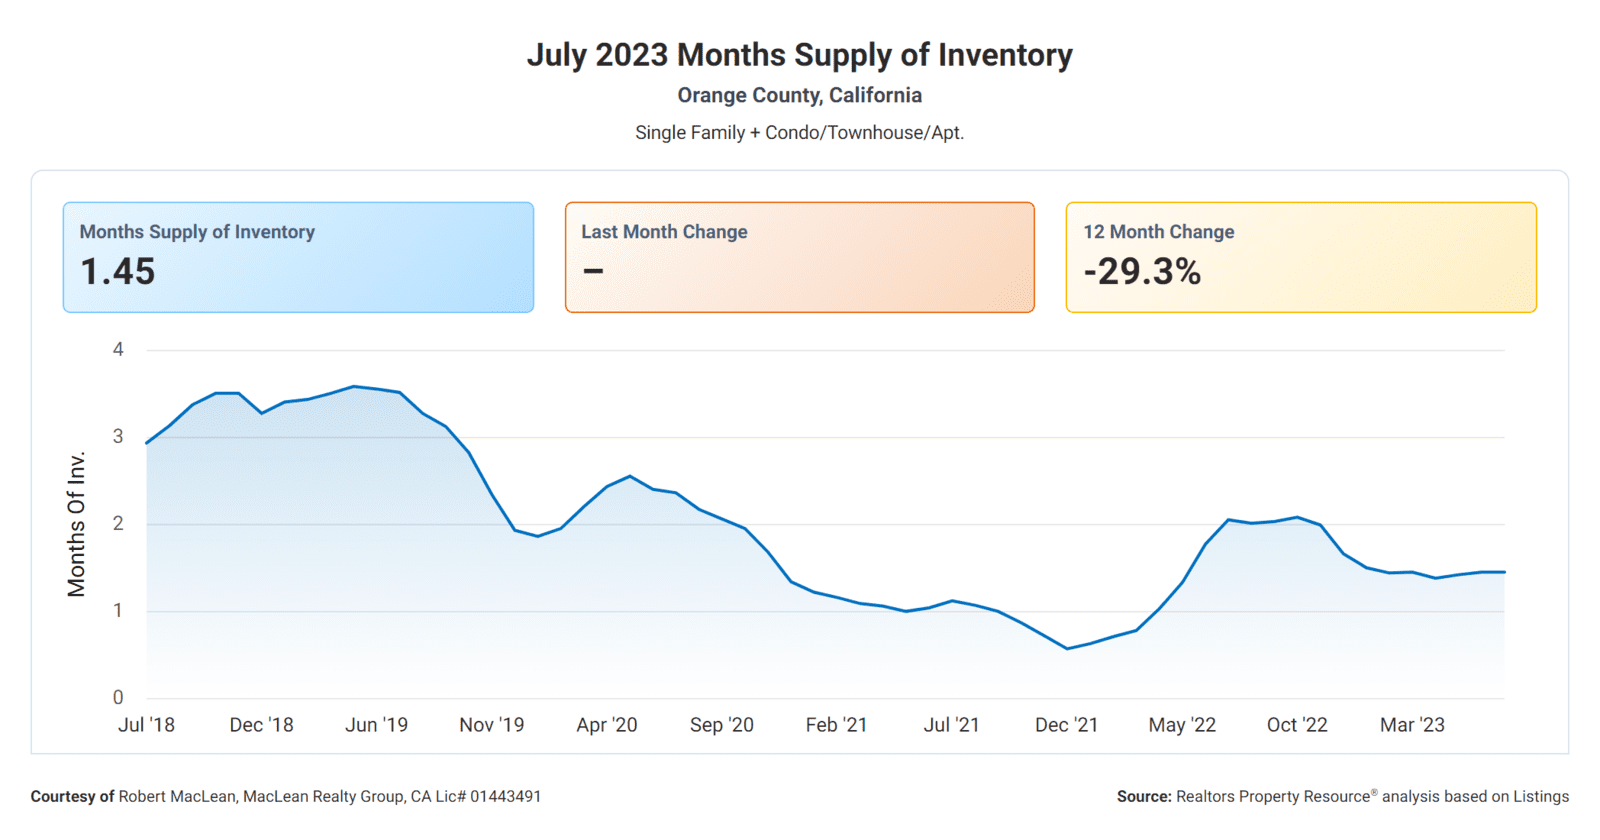 MONTHS SUPPLY OF INVENTORY